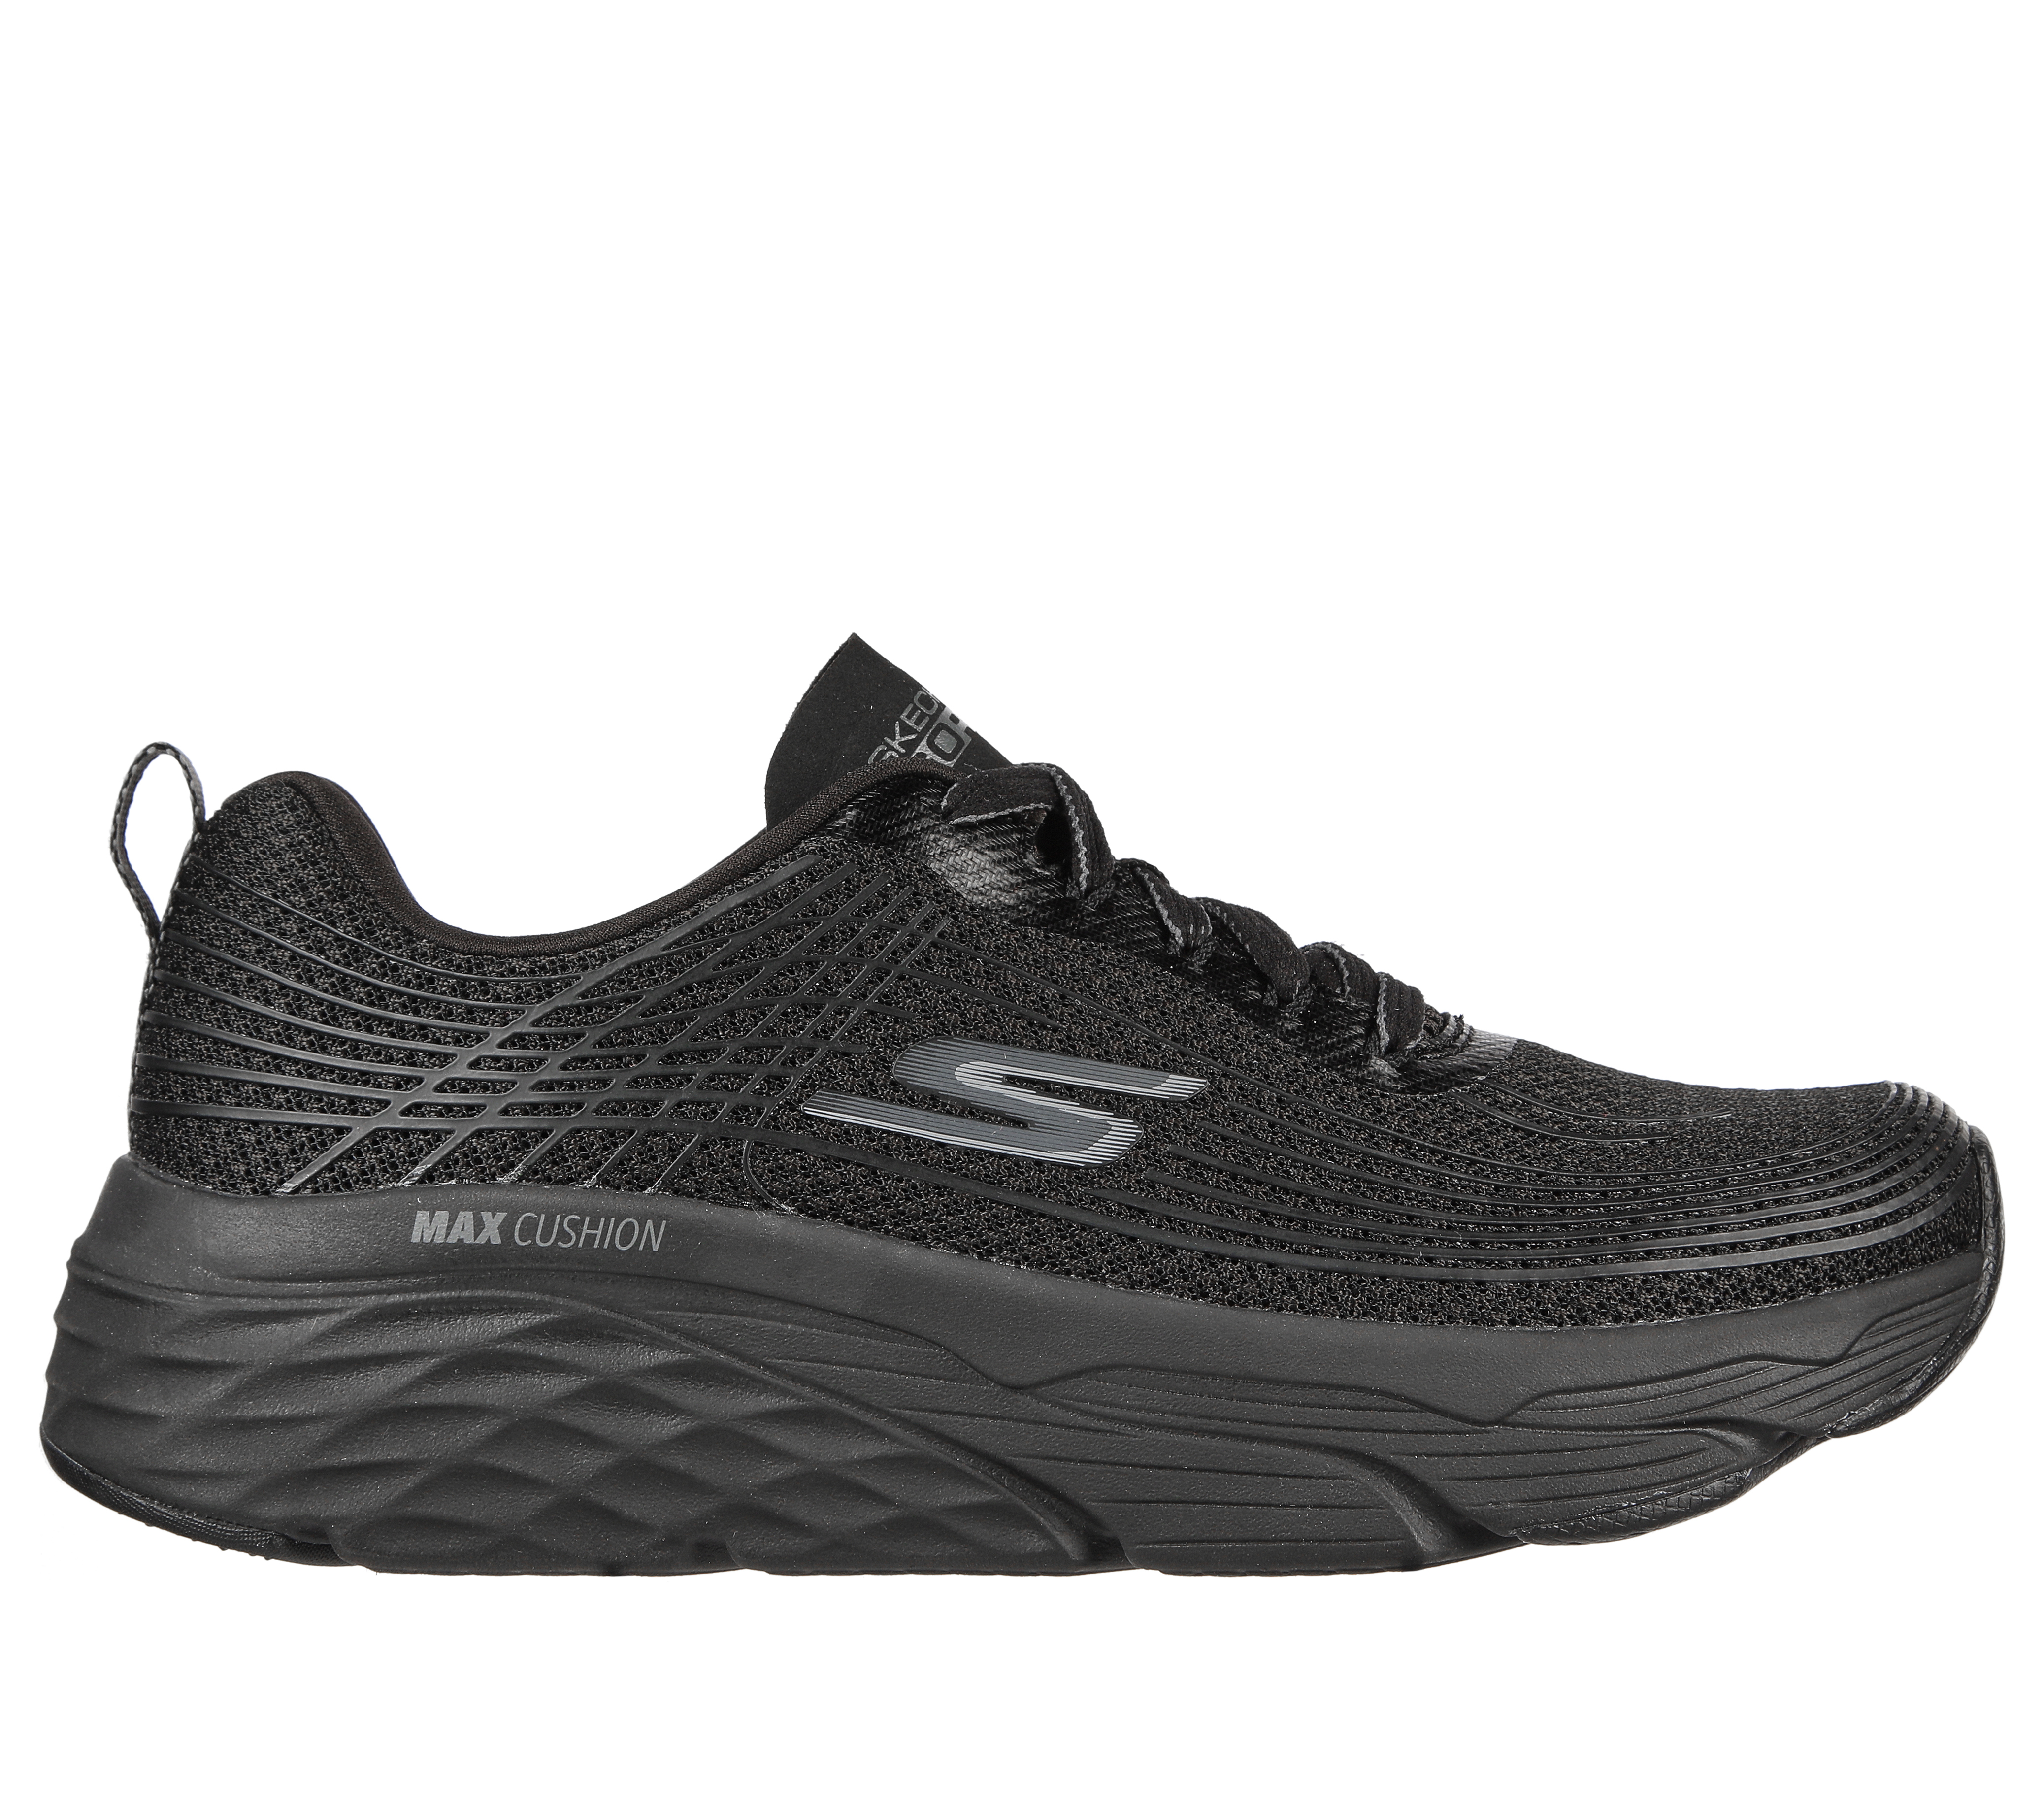 skechers max cushion elite safety shoes